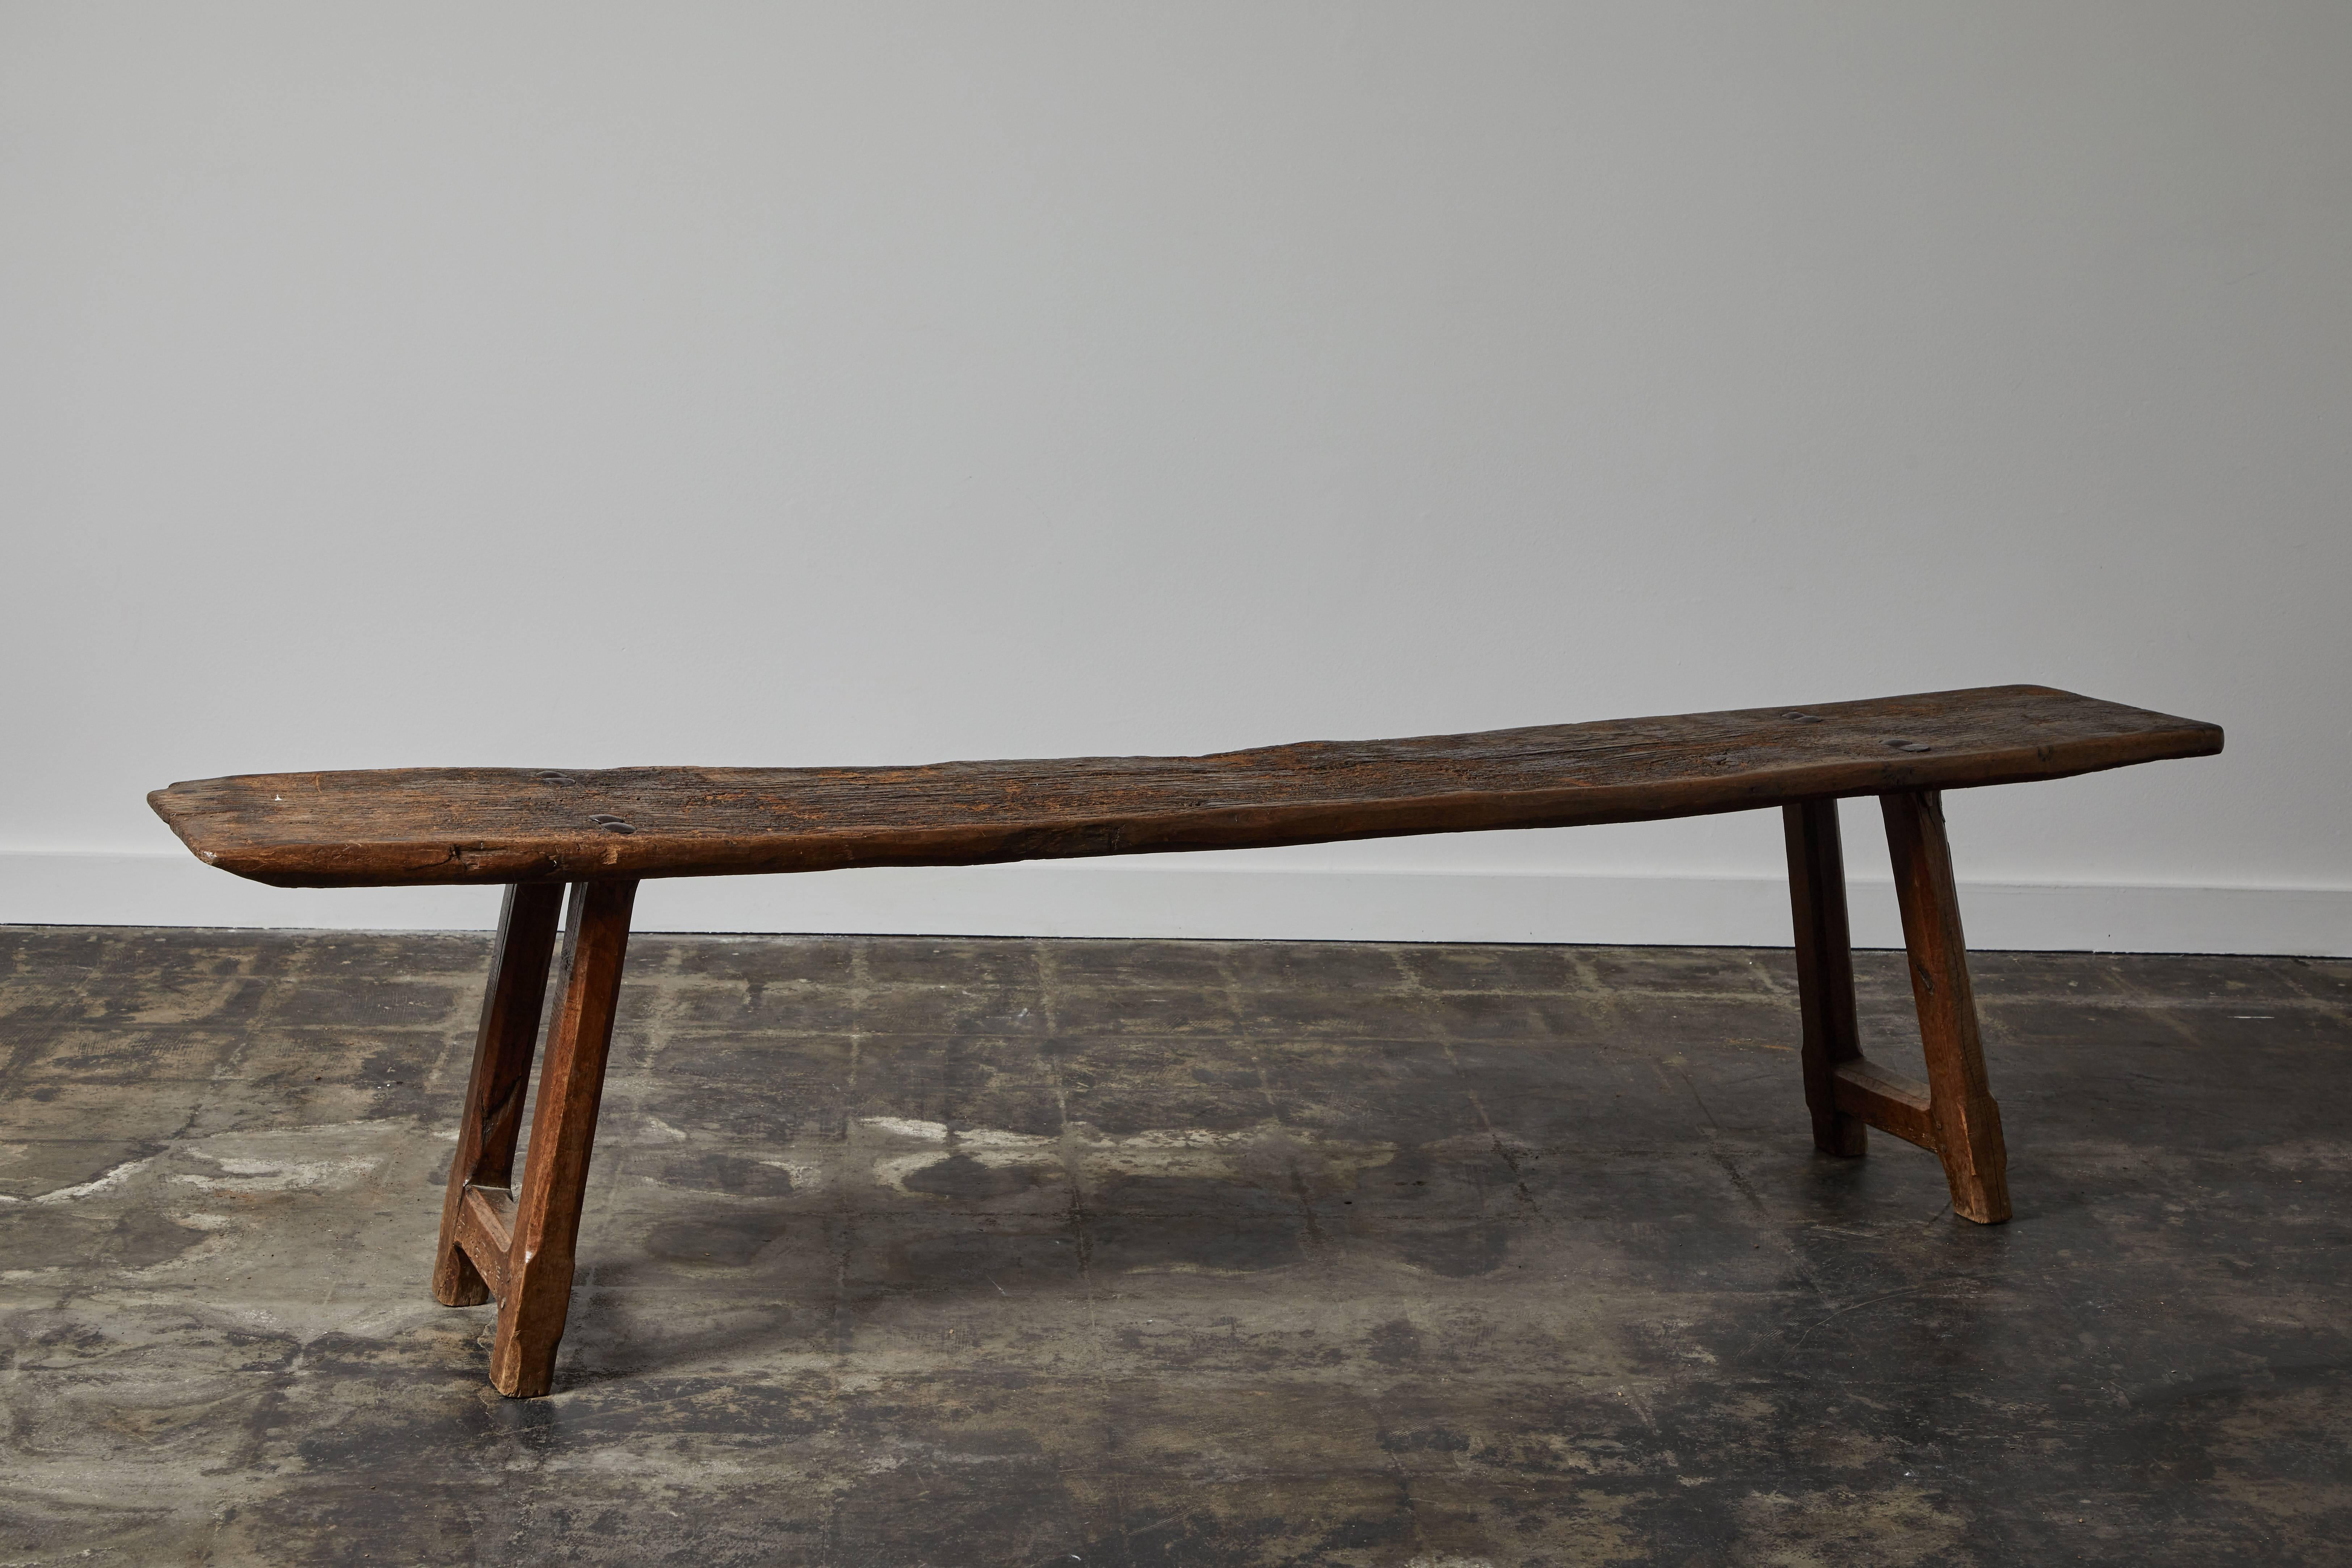 Handmade 18th century wood bench with strong patina and wrought iron details. Made in Spain, circa 1700s.